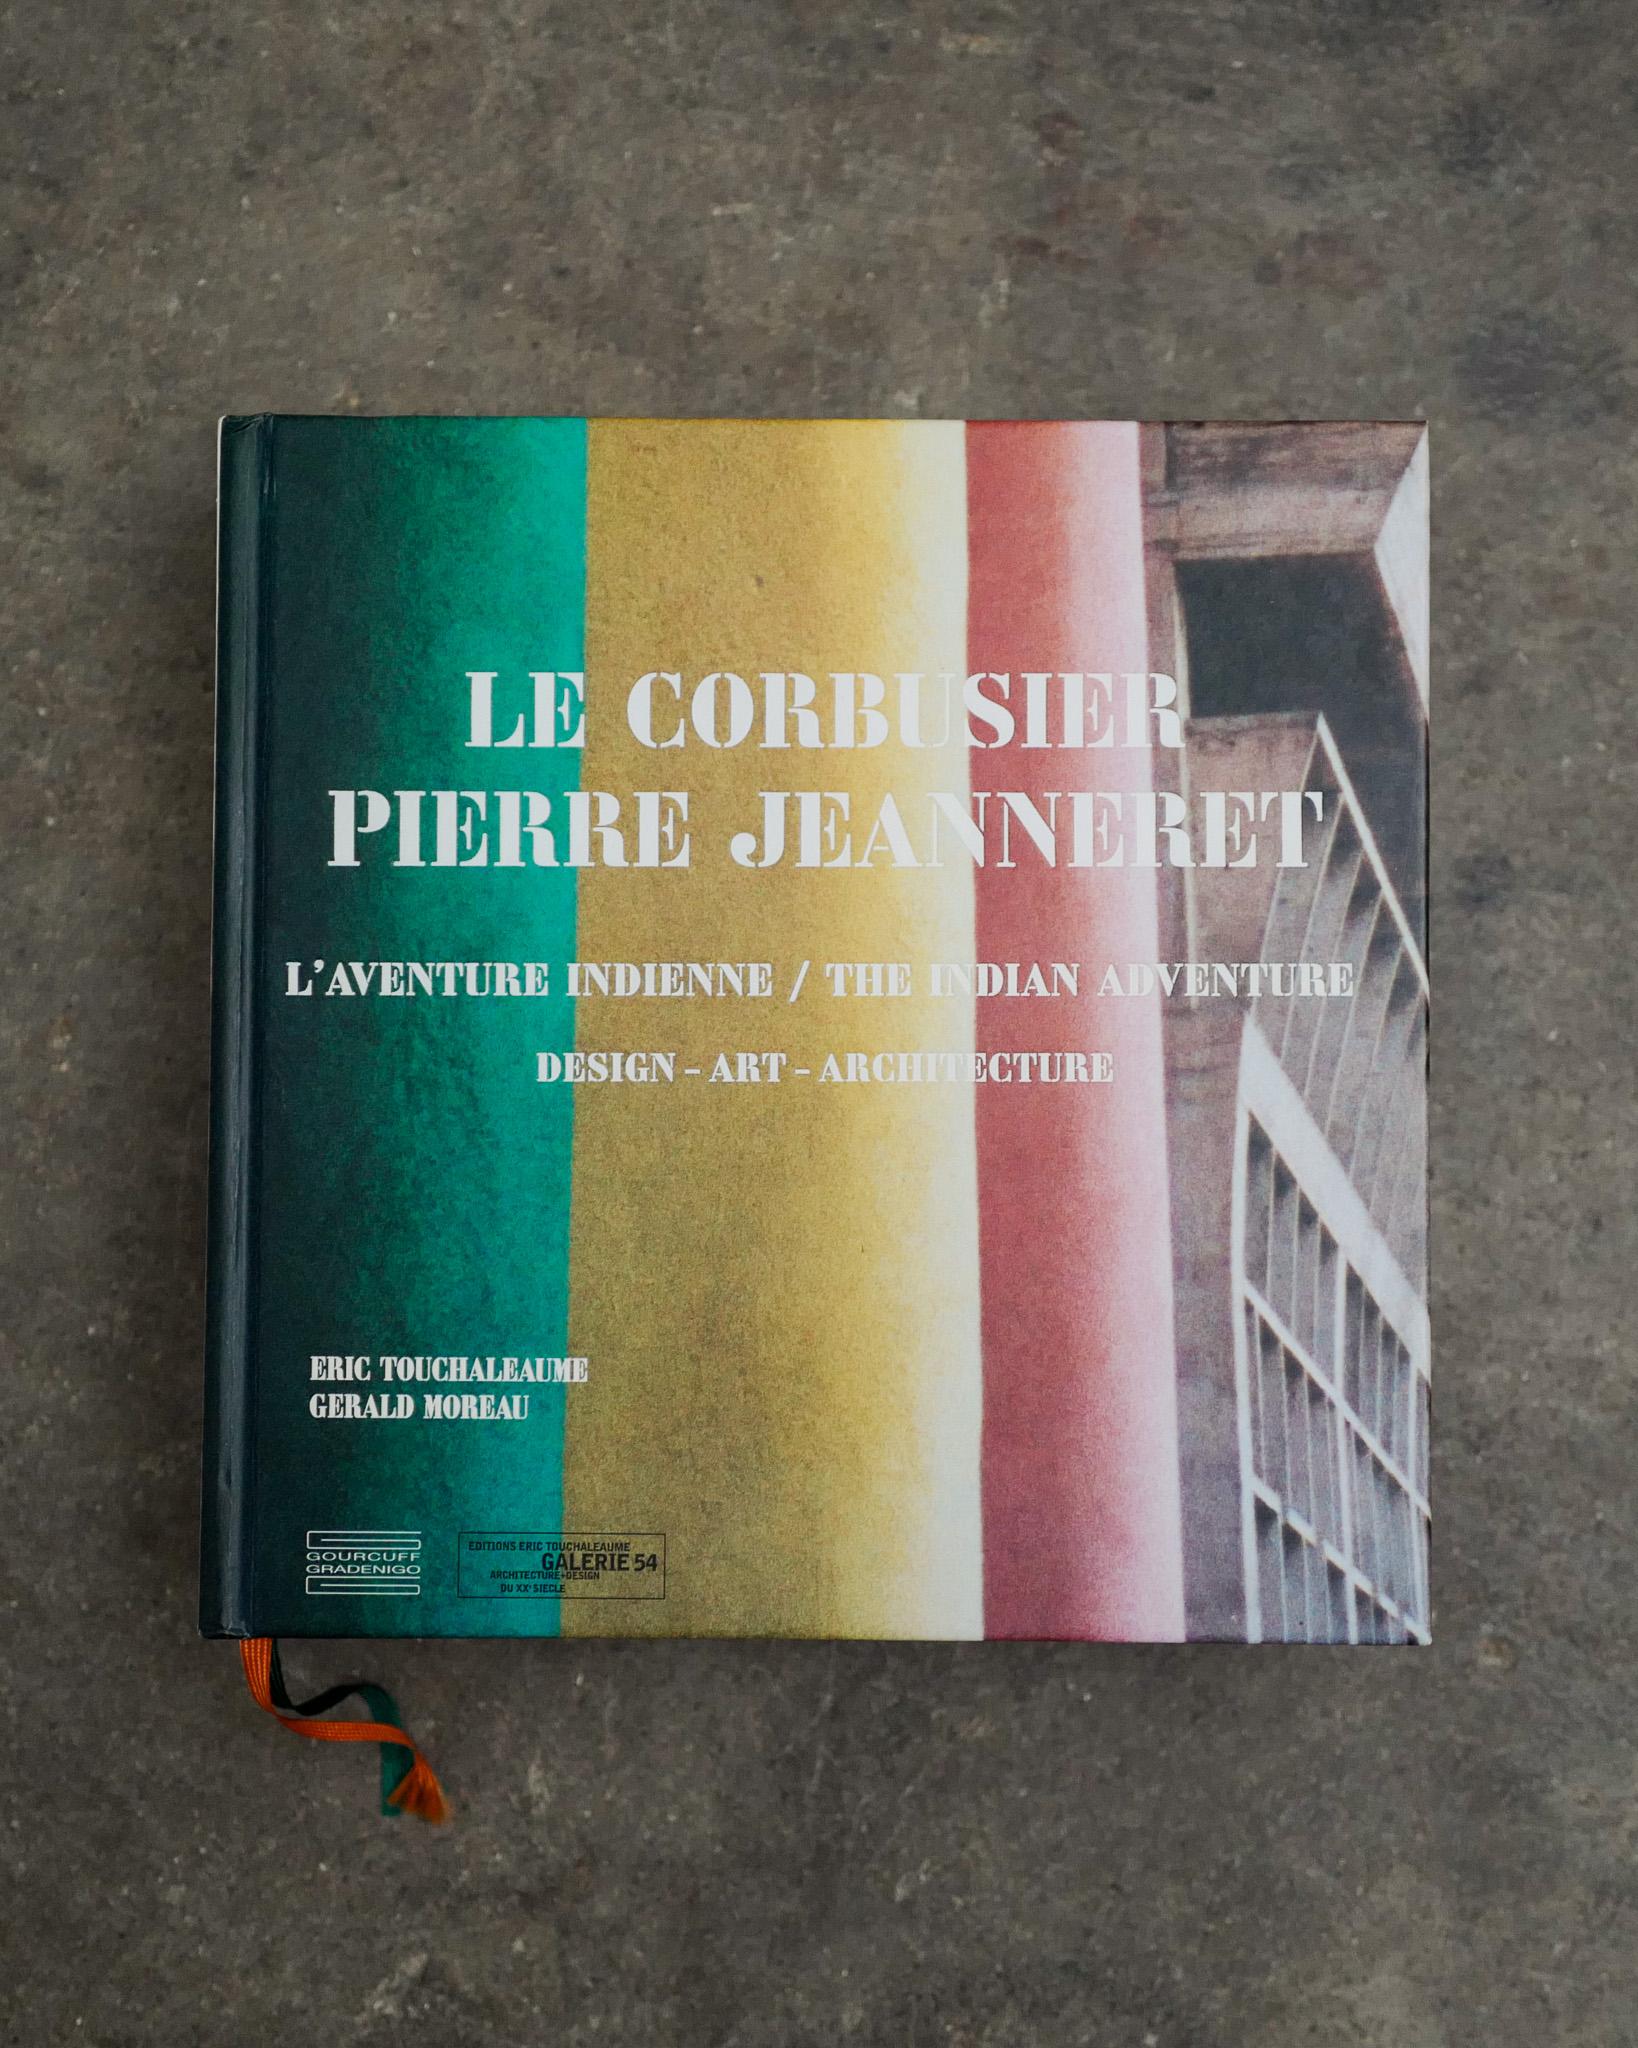 Rare and collectable book about the Pierre Jeanneret & Le Corbusier's 